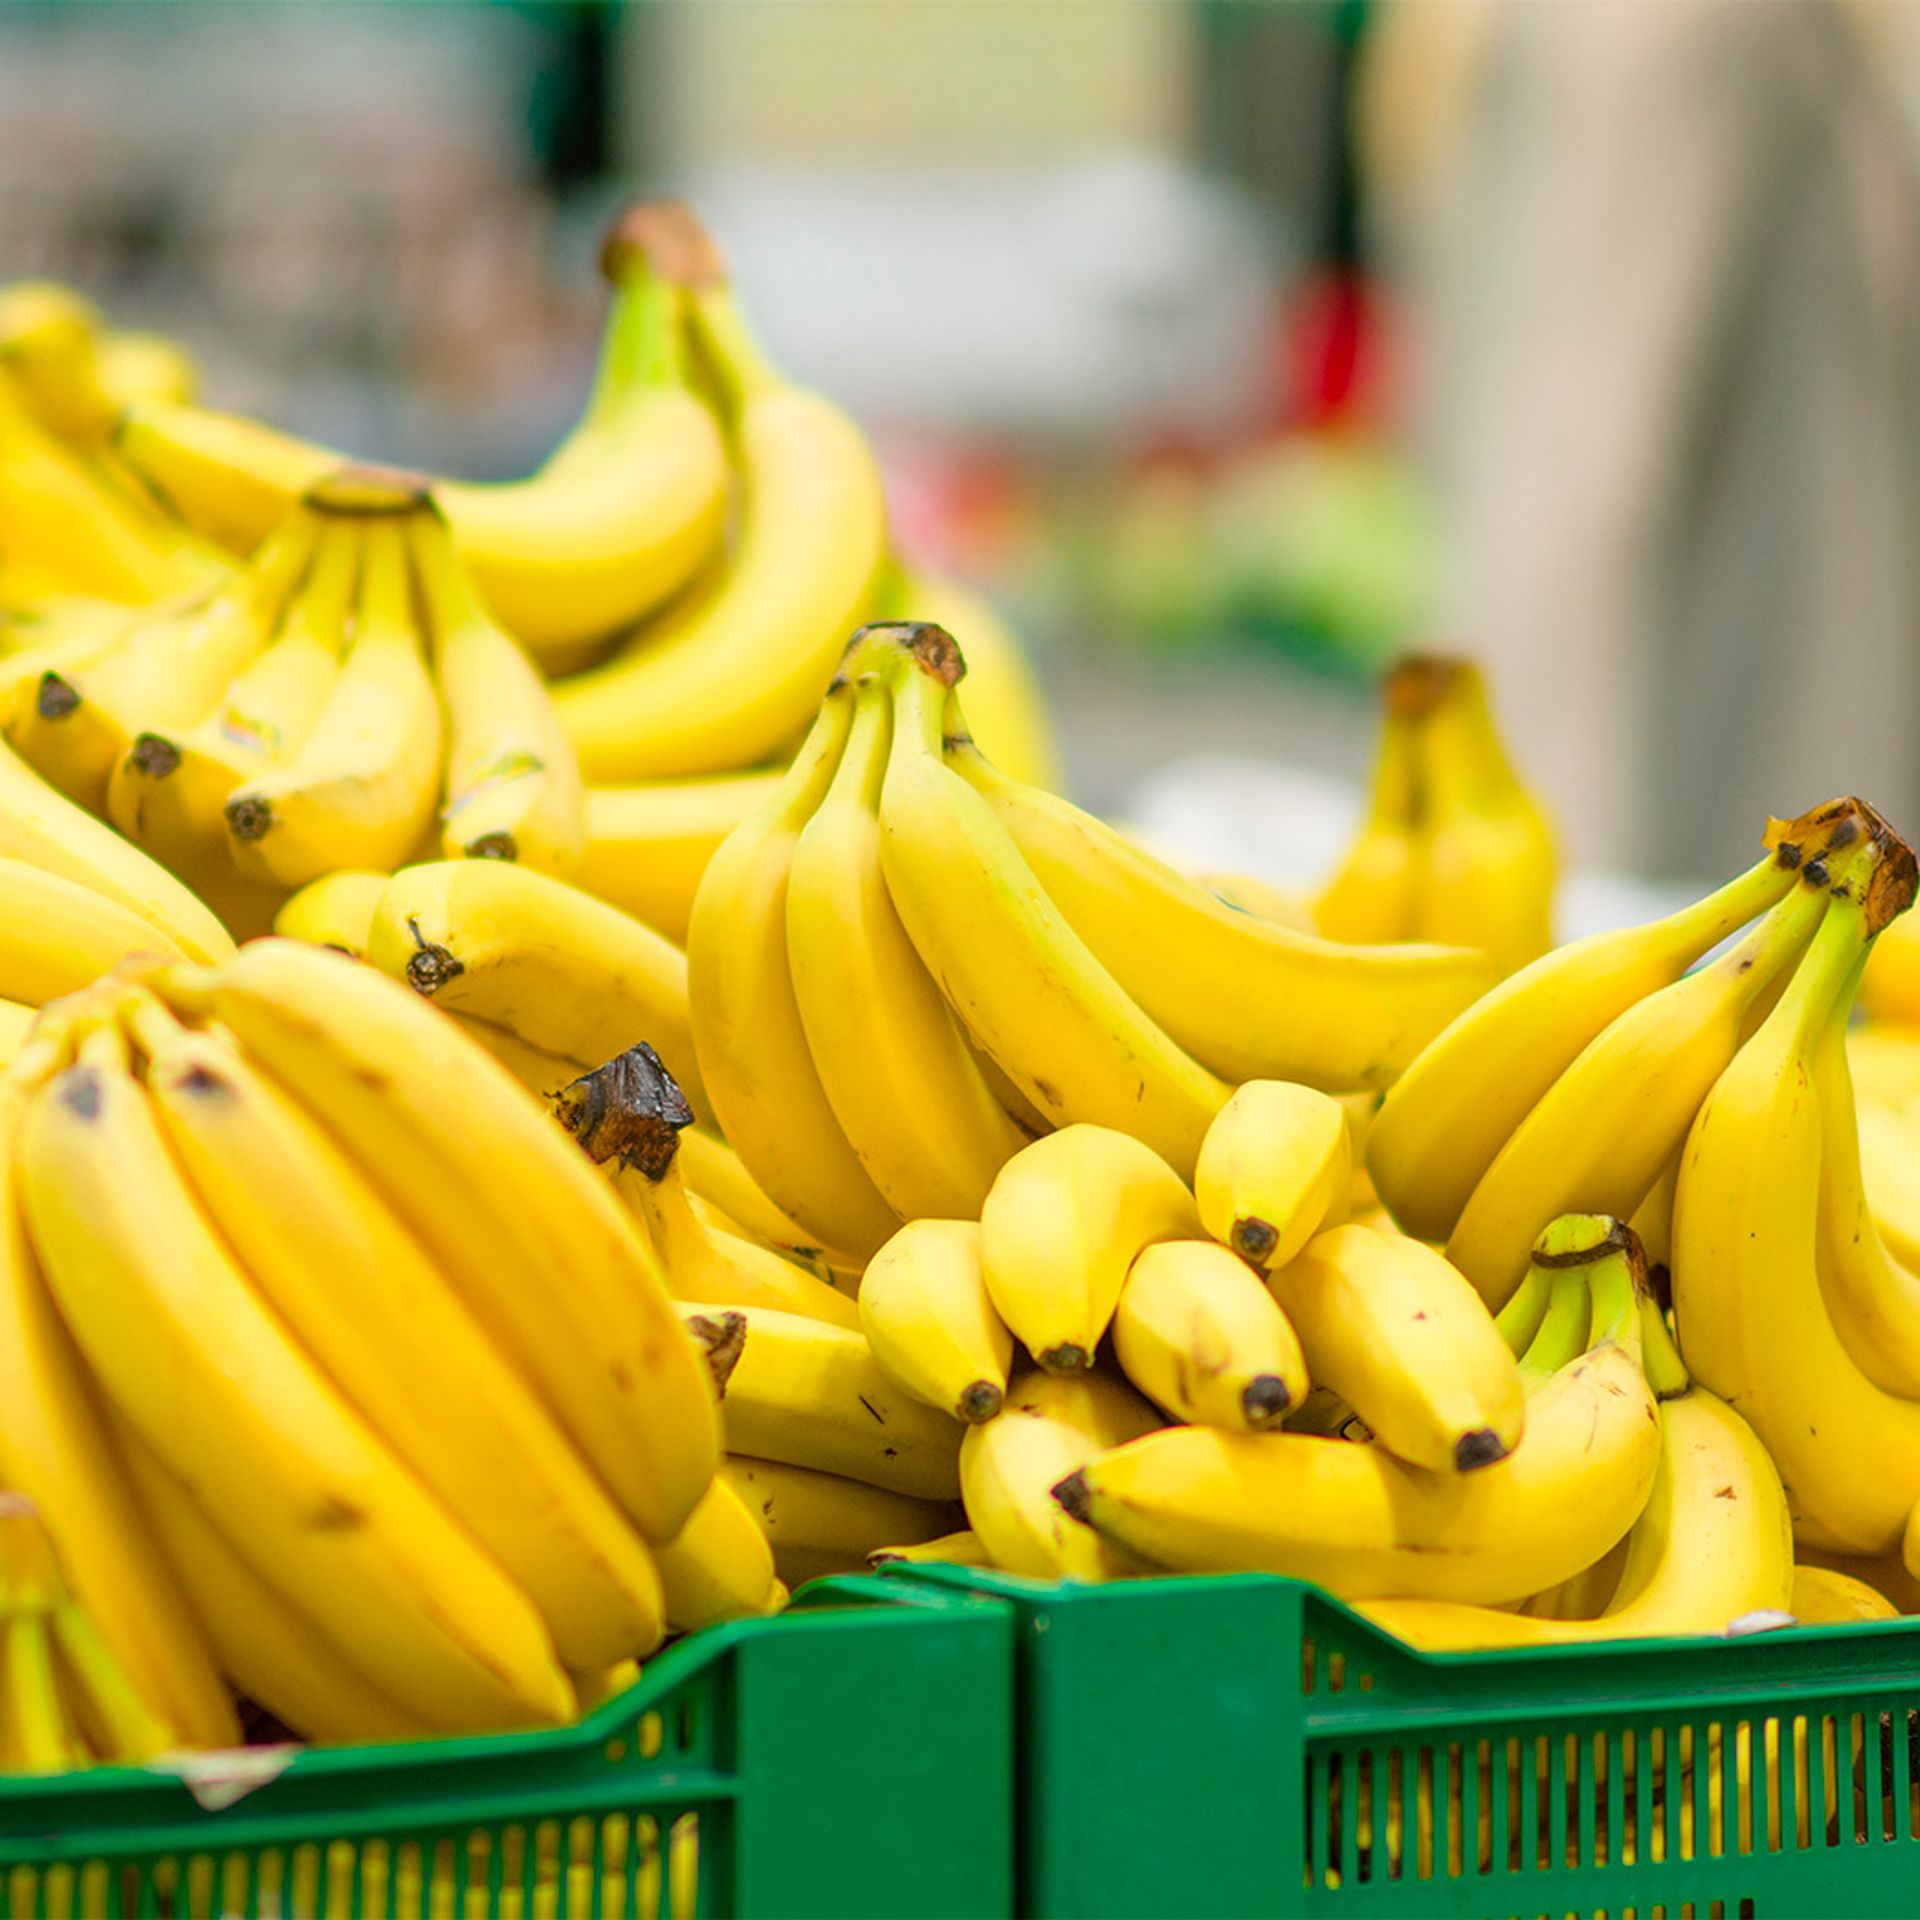 Image of bananas in a retail store